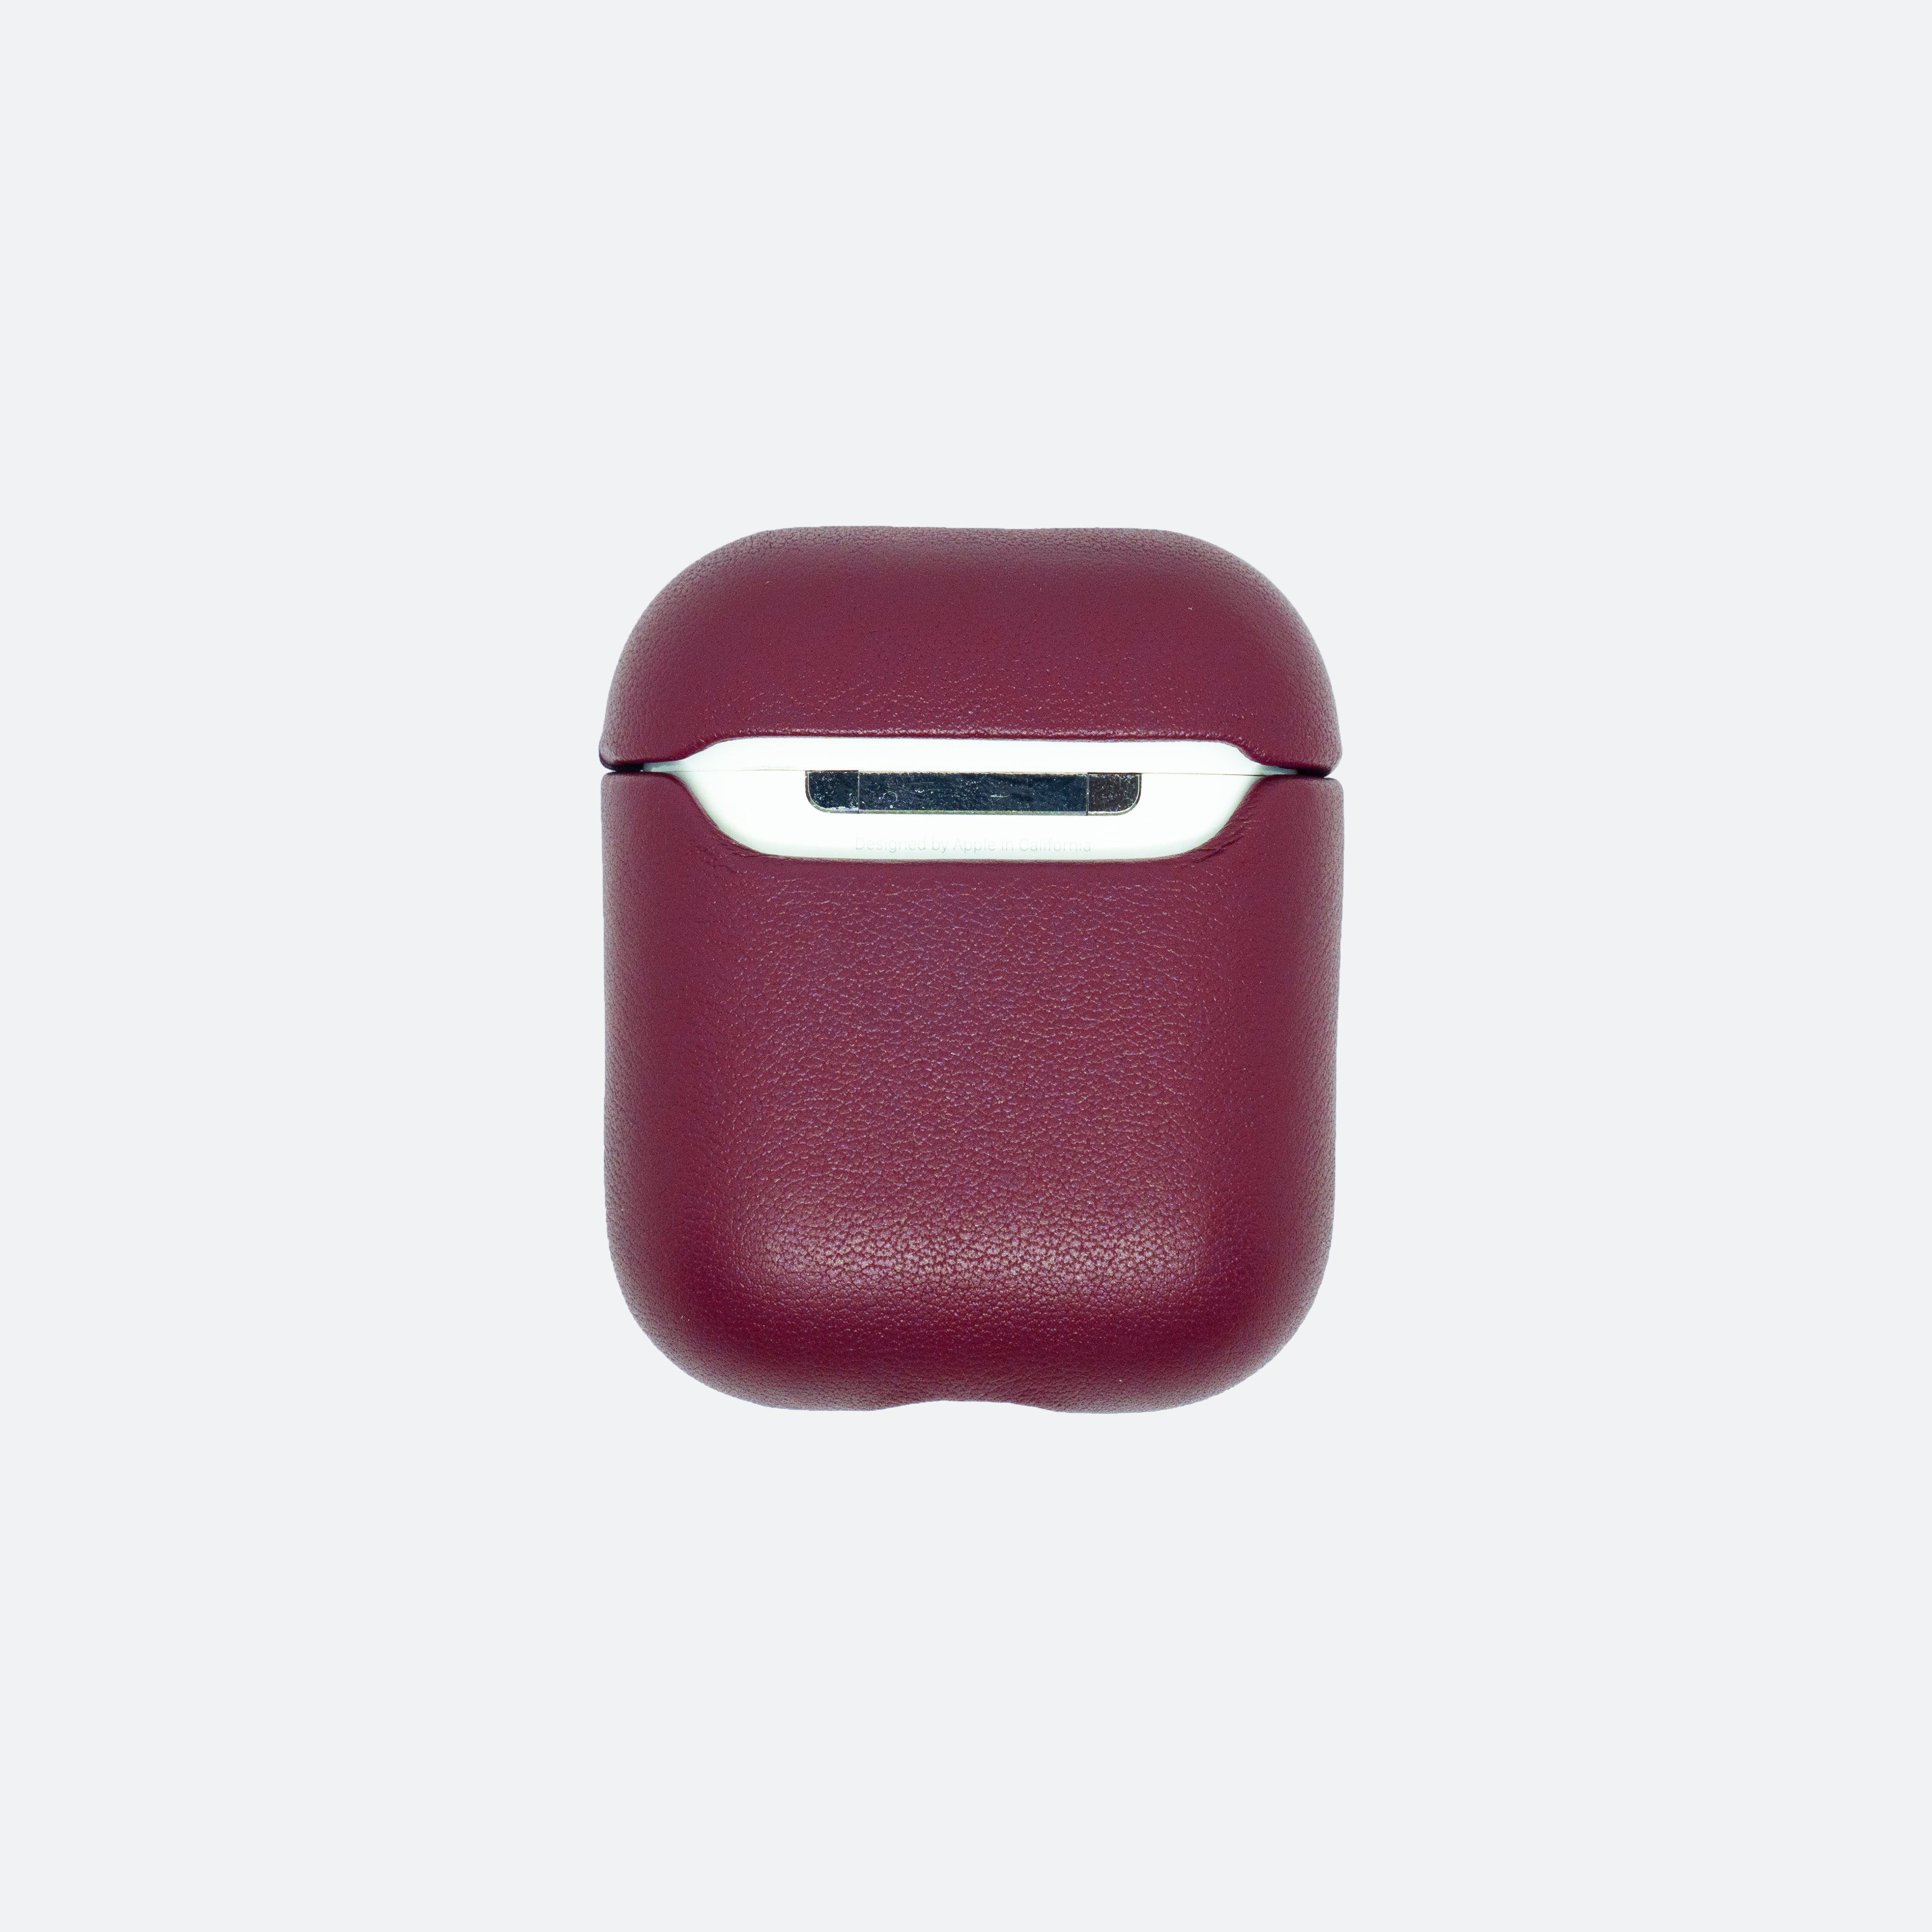 Personalised Burgundy Airpods Case in Singapore with name engraving and customisation